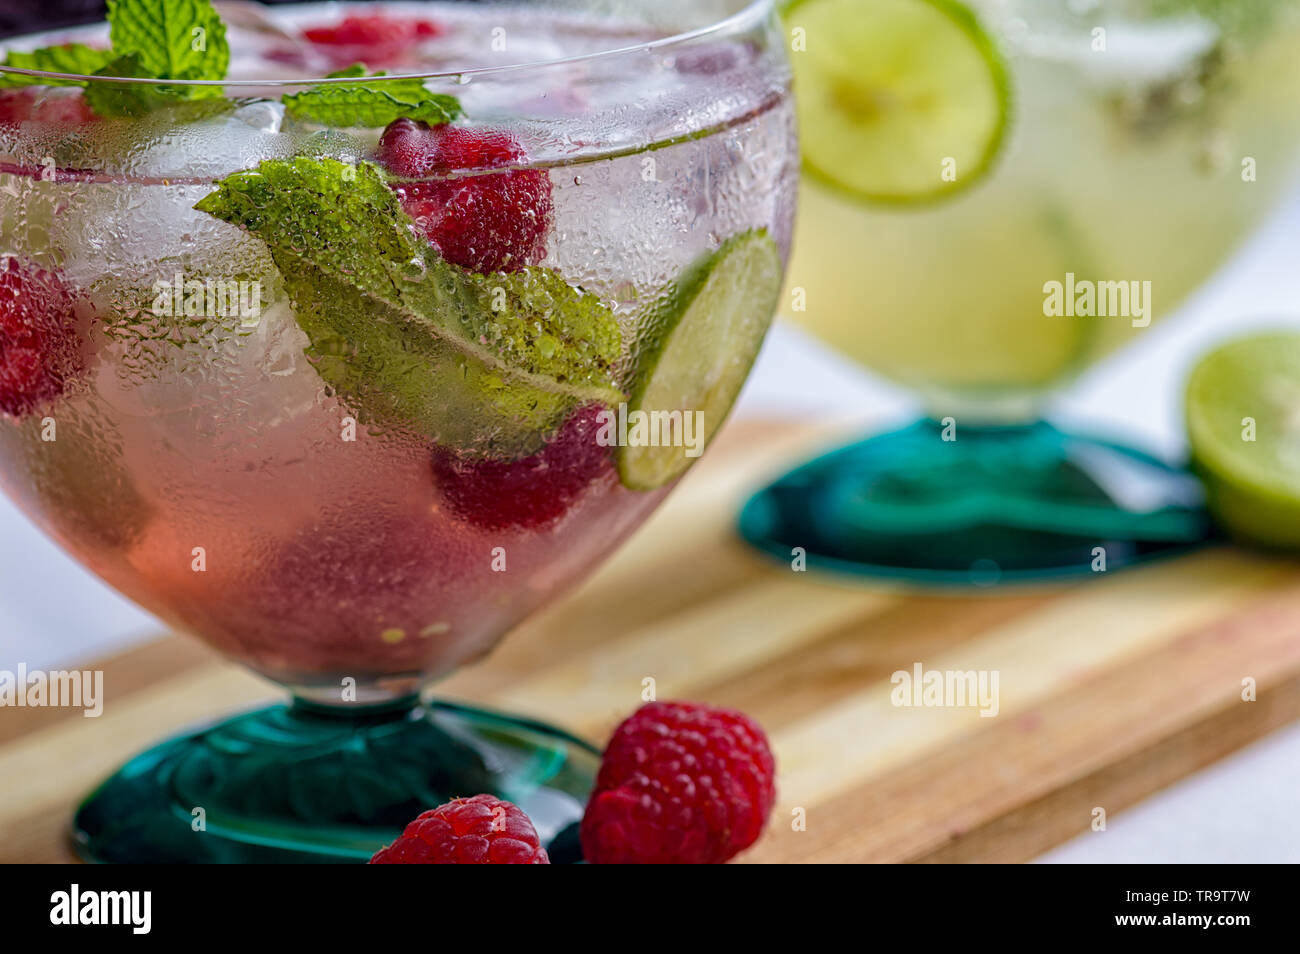 Raspberry Mojito And Mojito Rum Cocktail Drinks With Ingredients Limes Lemons Mint Brown Sugar And Raspberries Concept For Restaurants Food And Stock Photo Alamy,What Is A Dogs Normal Temperature Supposed To Be